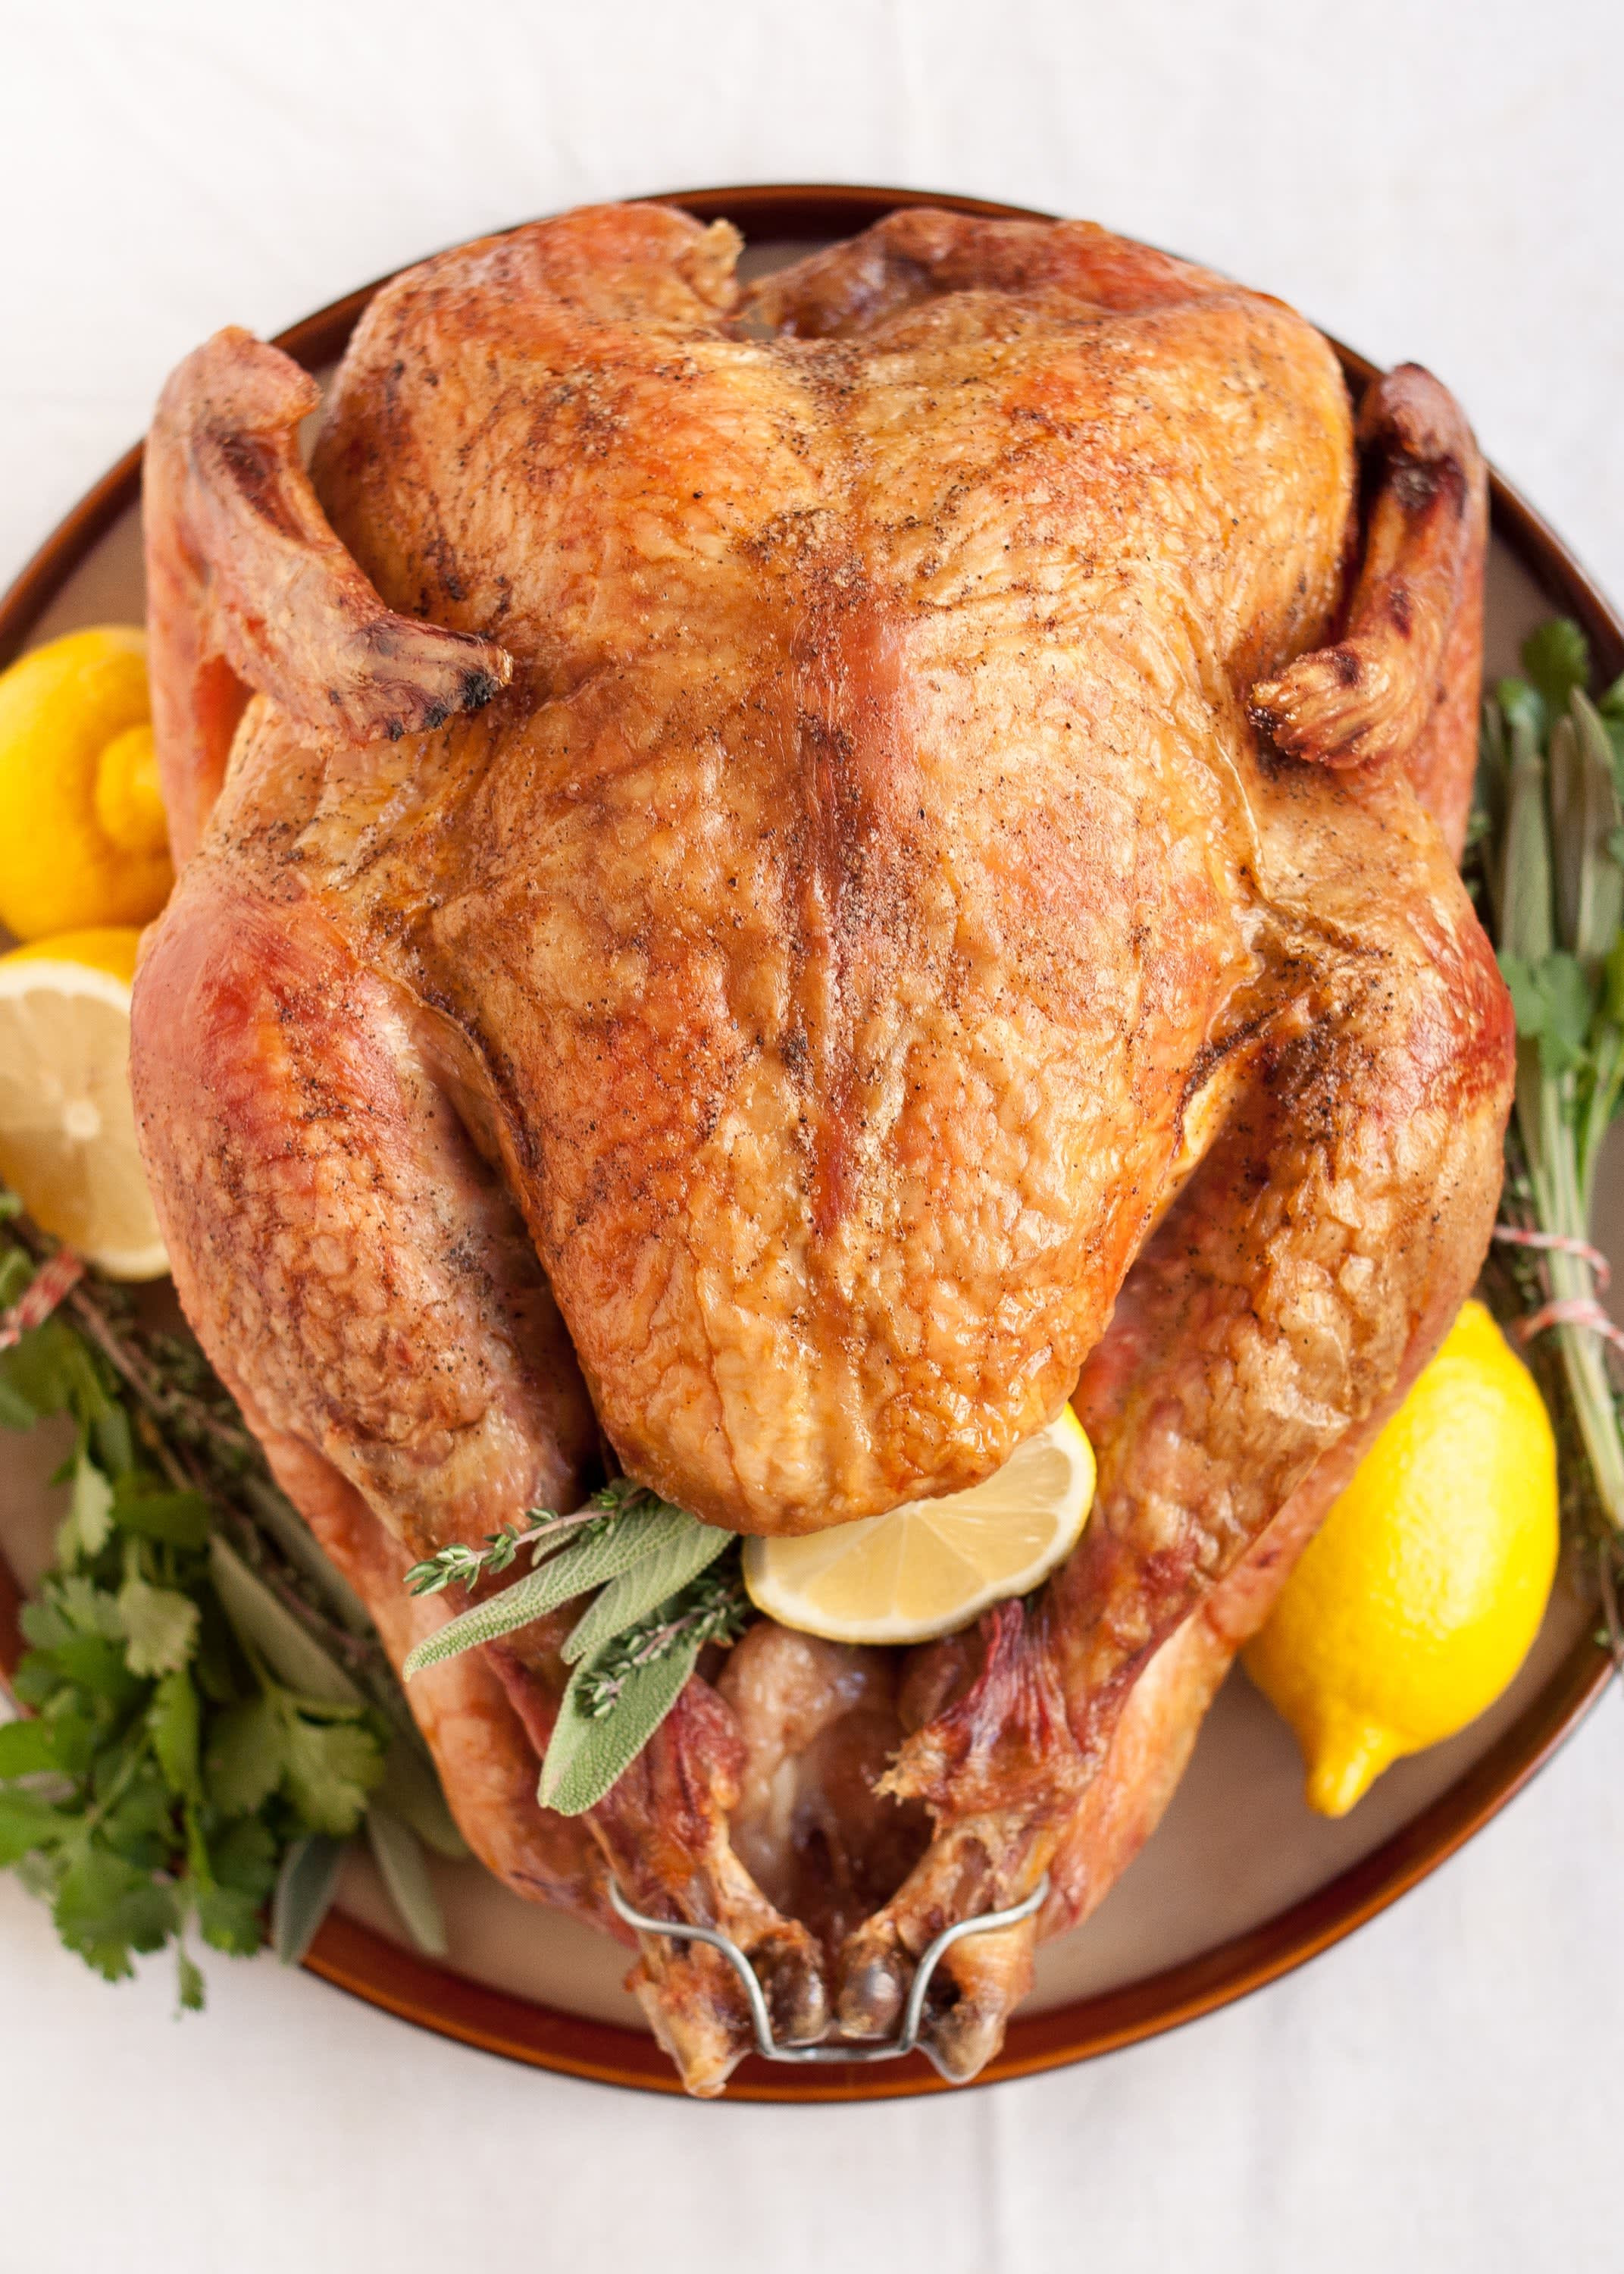 Best Turkey To Buy For Thanksgiving
 Everything You Need to Know About Buying a Turkey